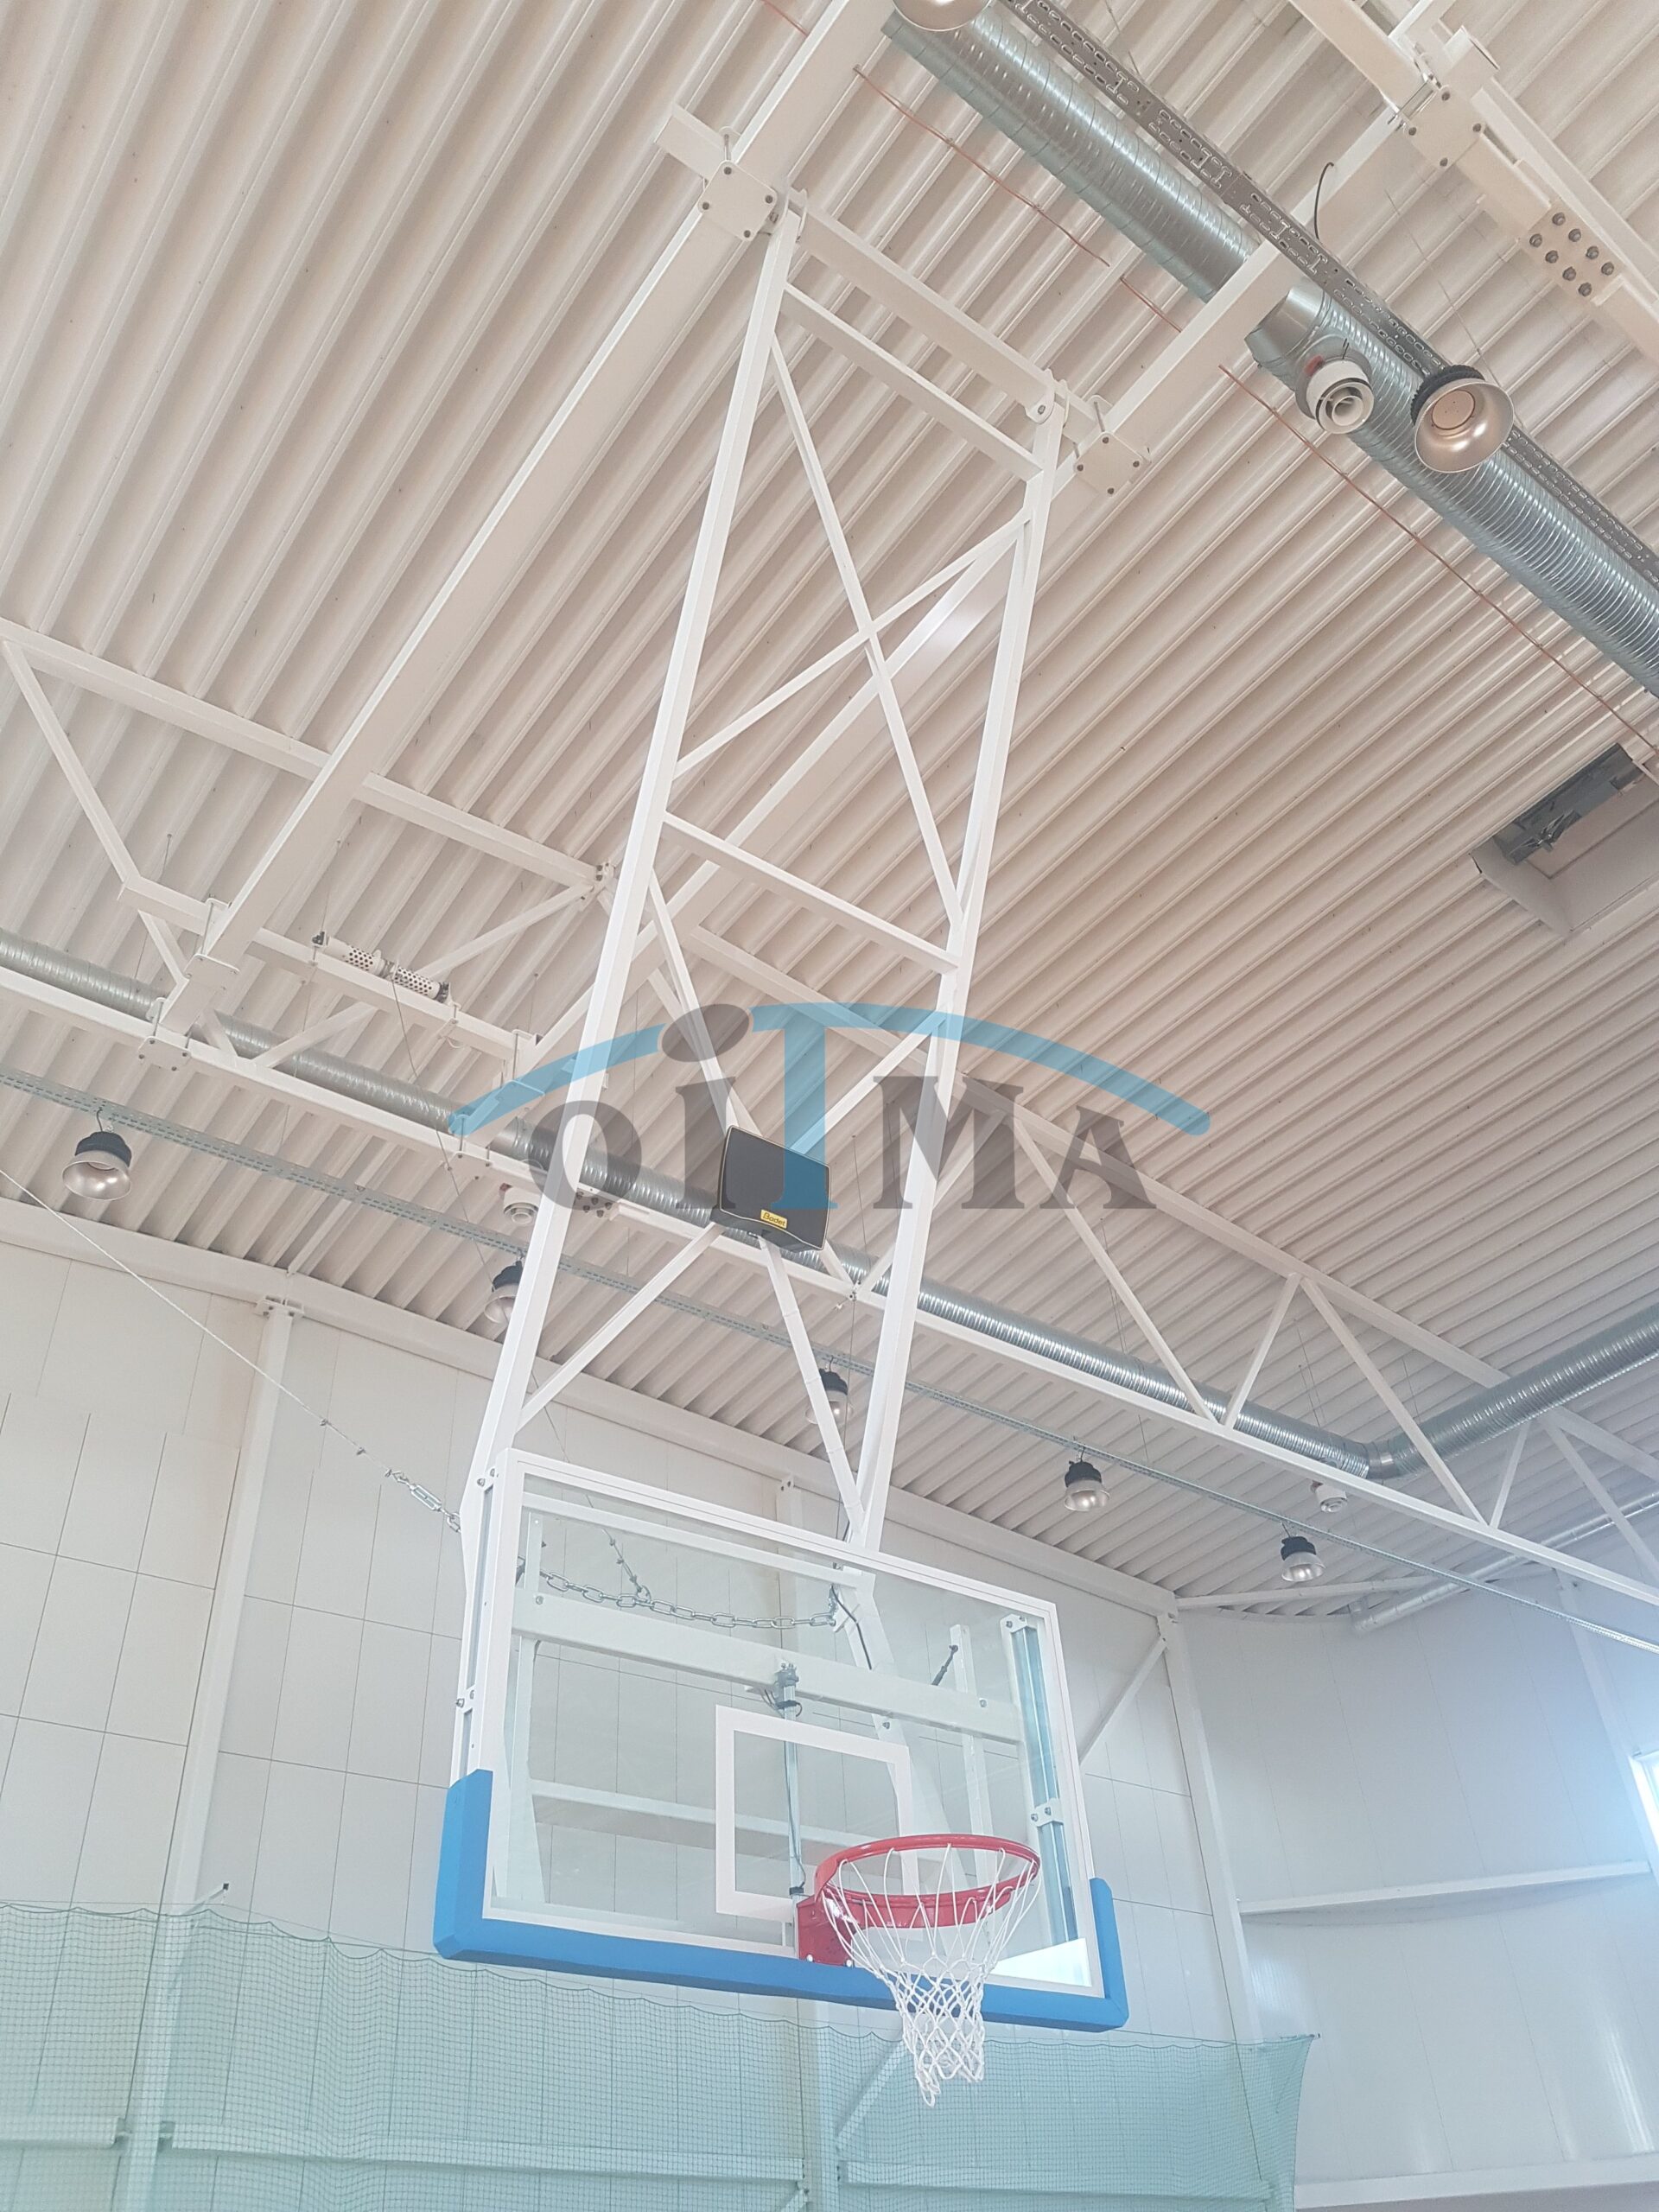 Ceiling mounted basketball construction